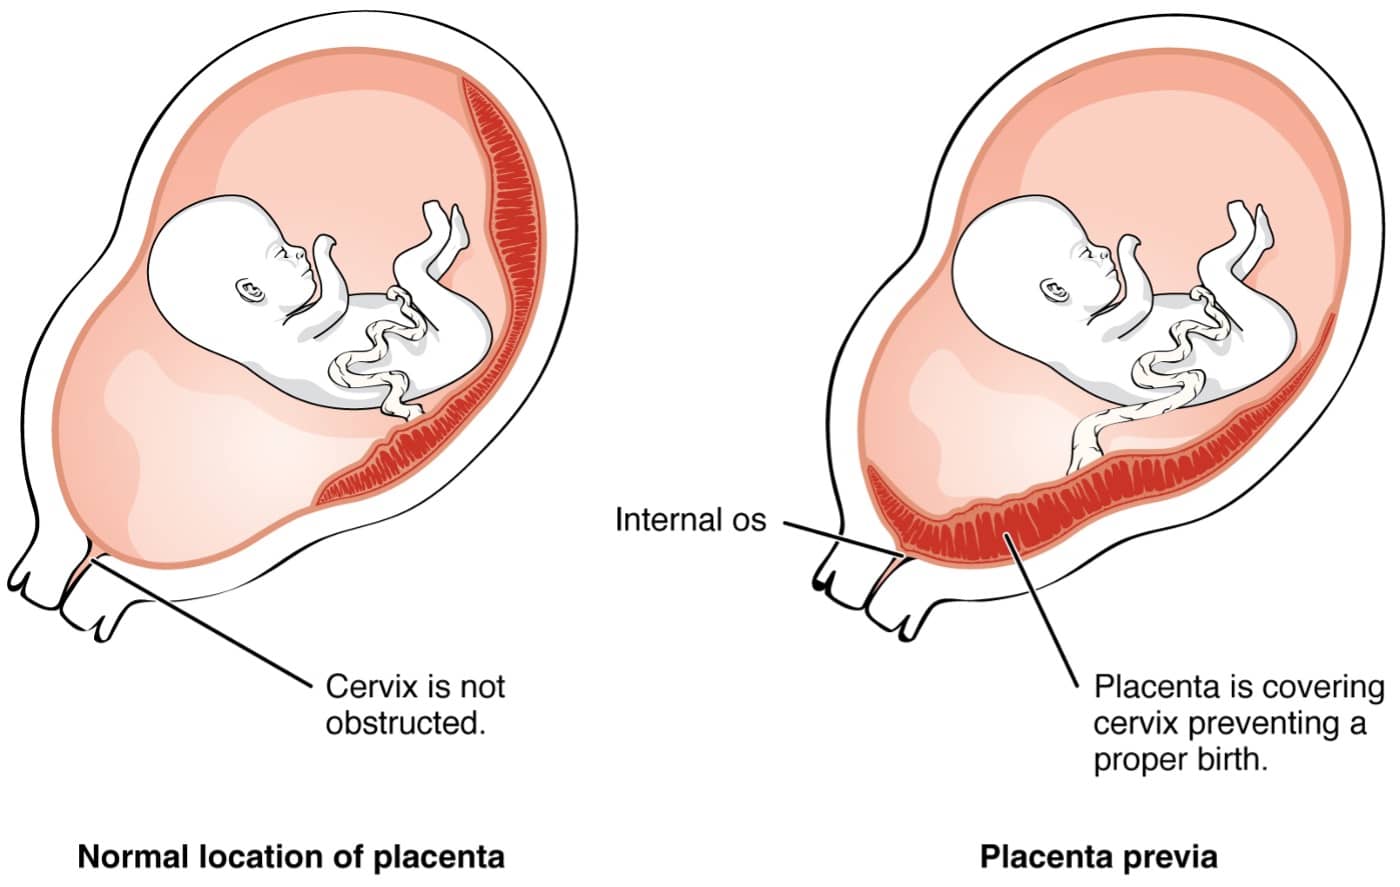 digram showing differences between a normal placenta location vs a placenta previa